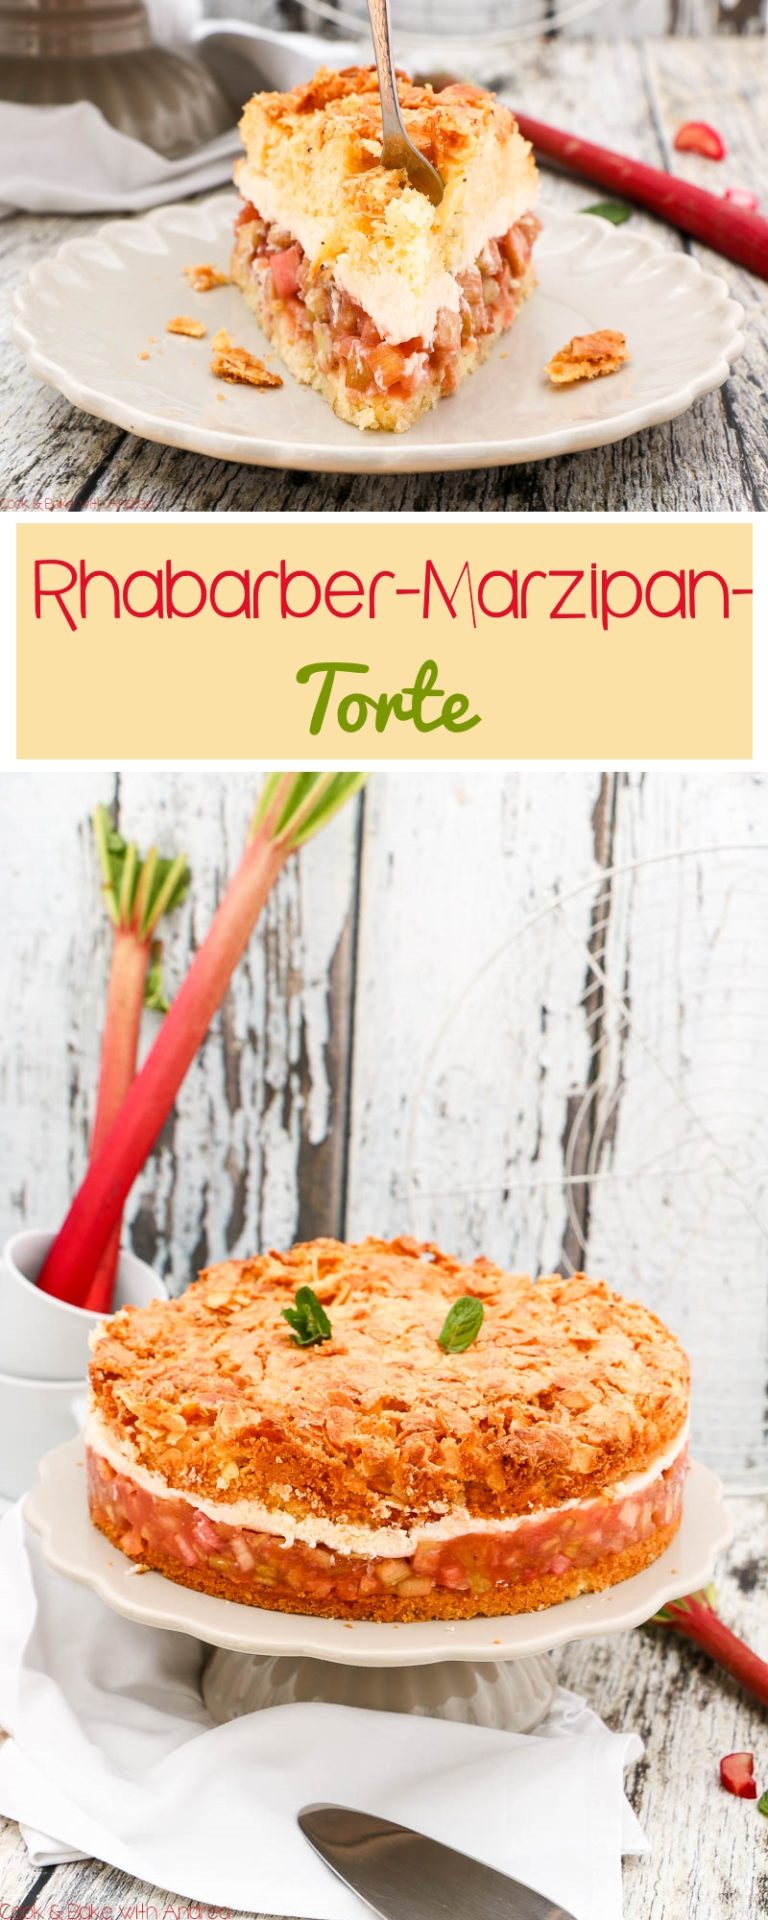 Rhabarber-Marzipan-Torte mit Sahne - C&amp;B with Andrea